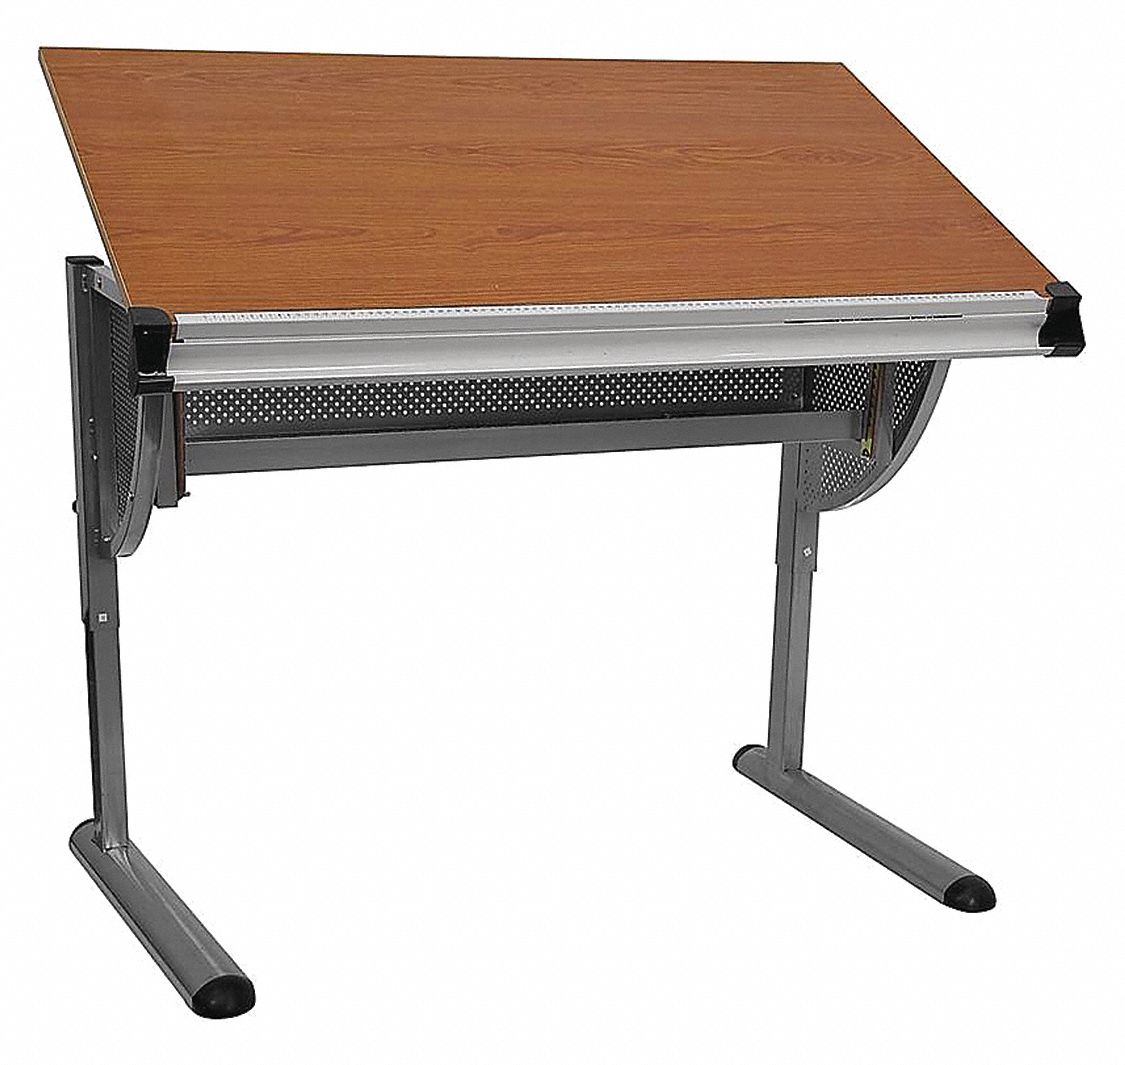 Flash Furniture Adjustable Draft Table Overall 45 1 4 W 420g79